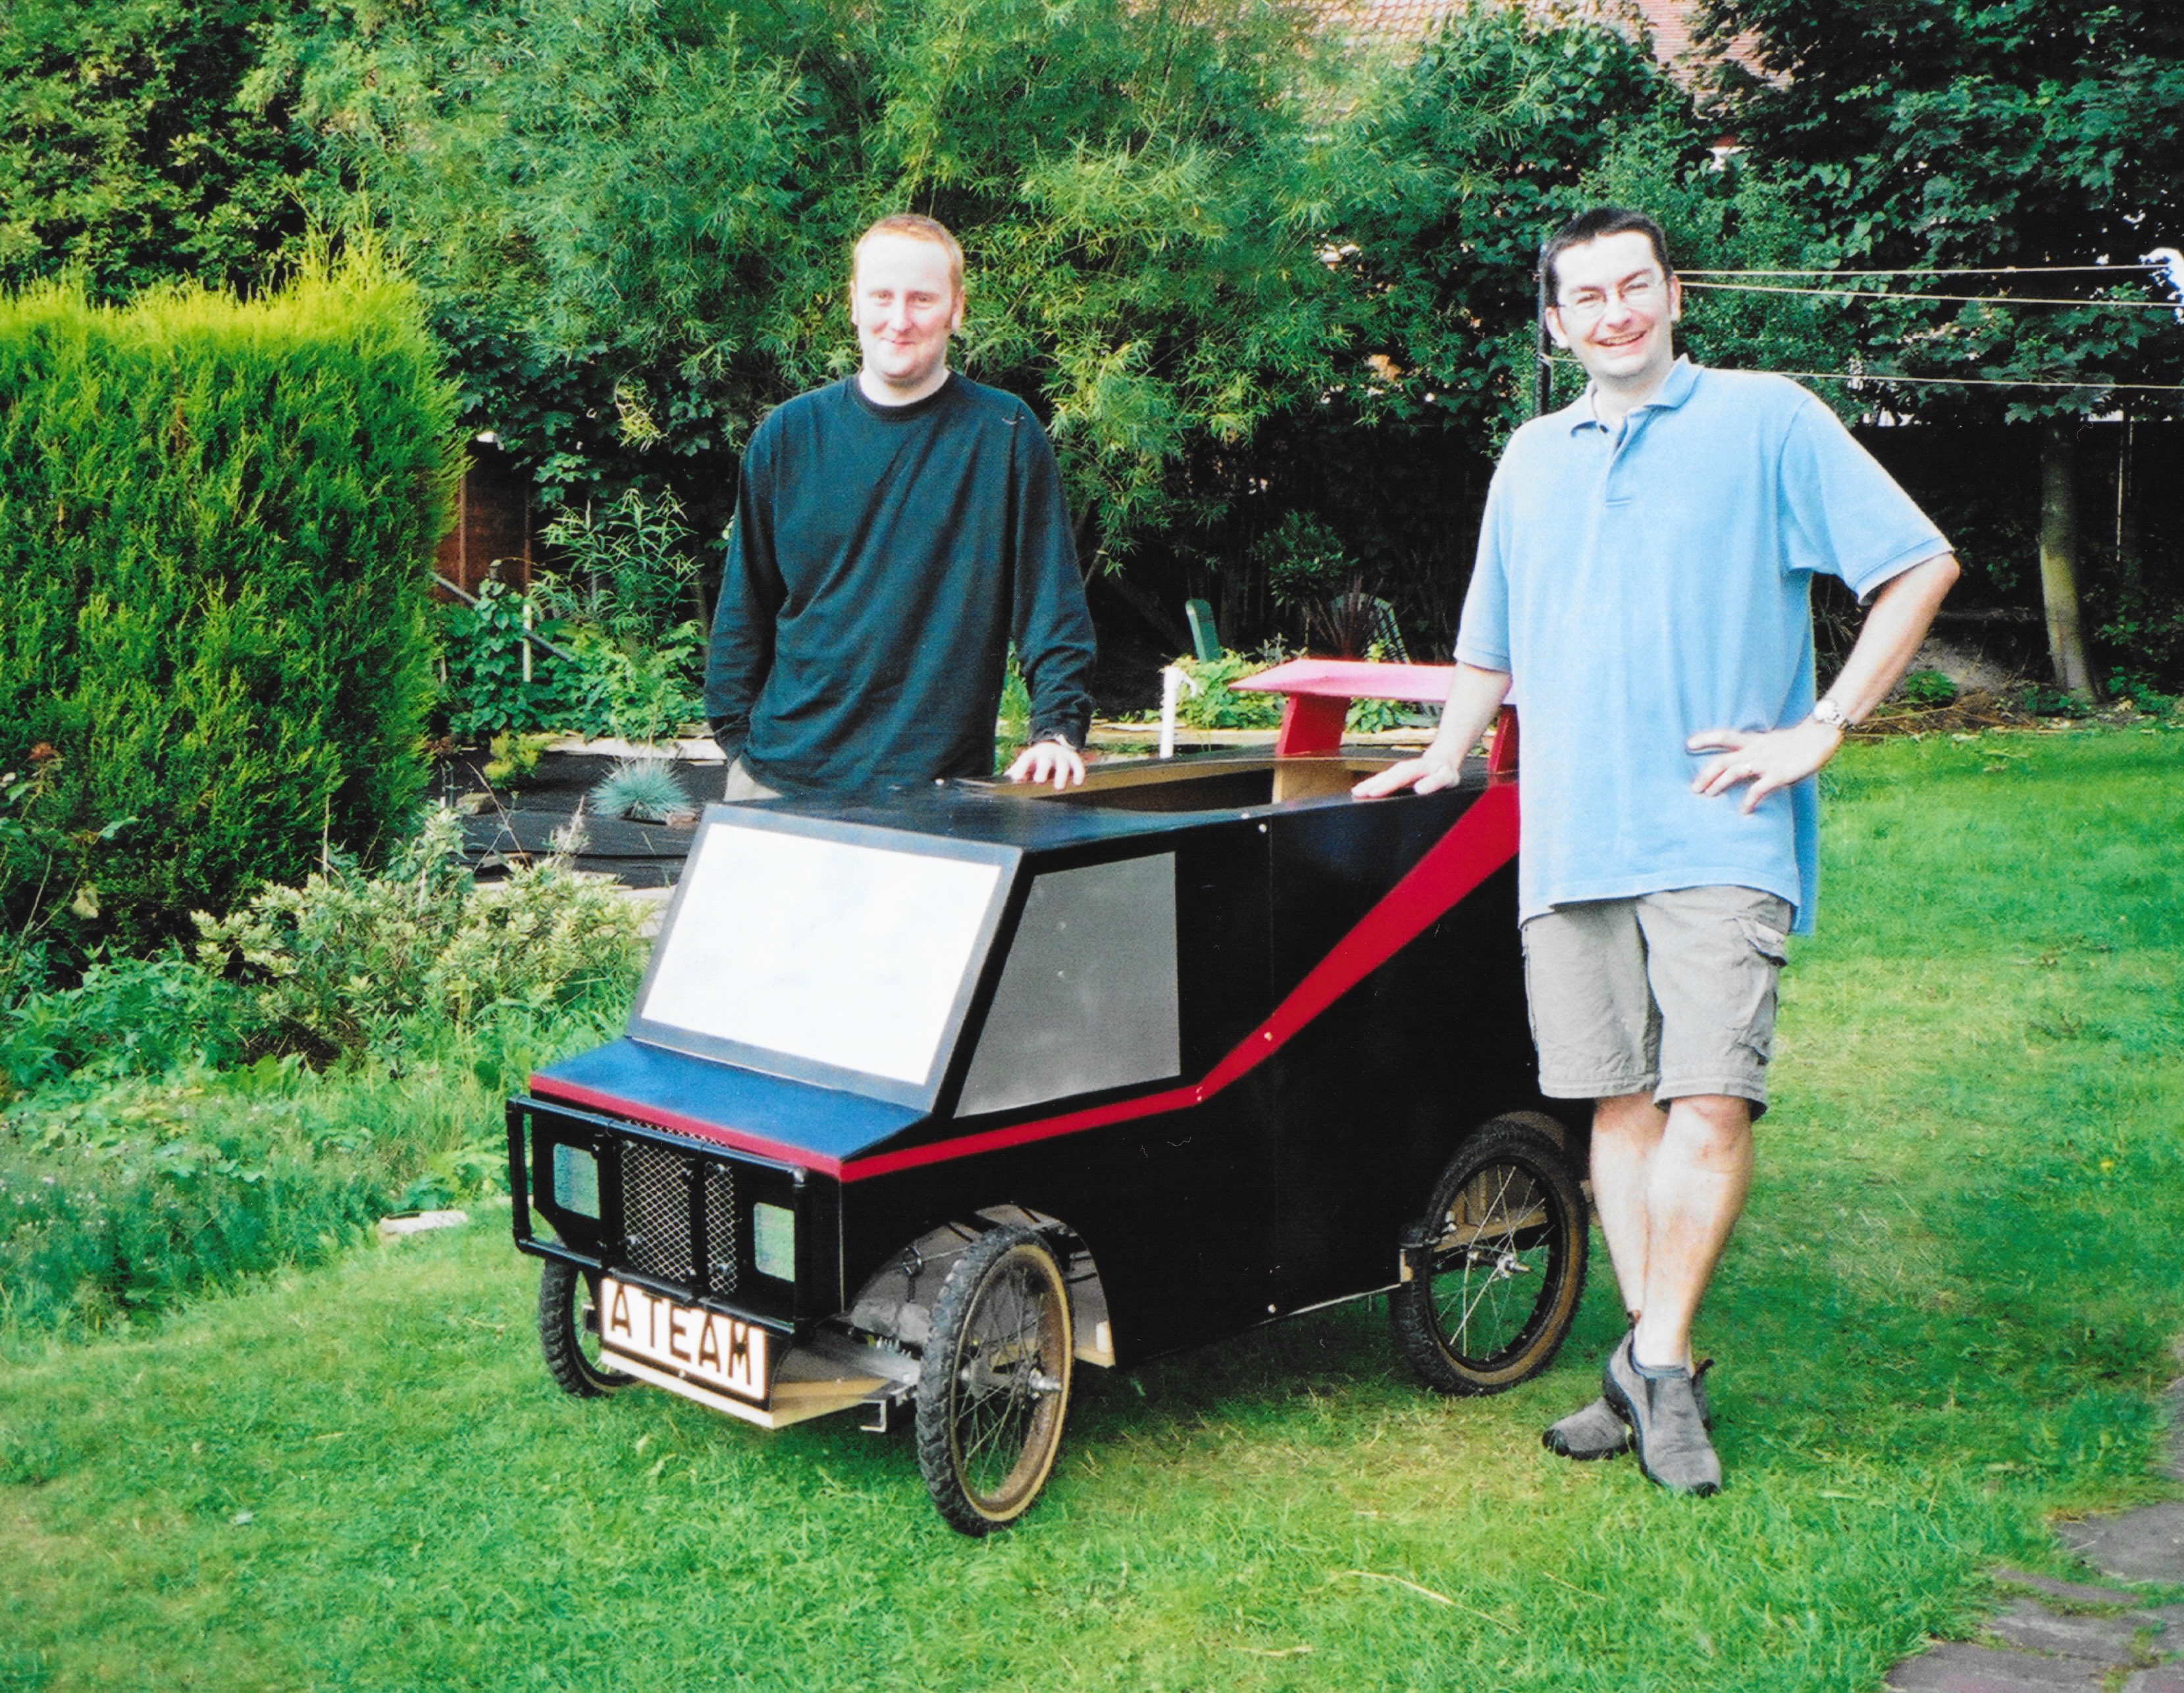 Two men standing next to a soapbox vehicle in a garden